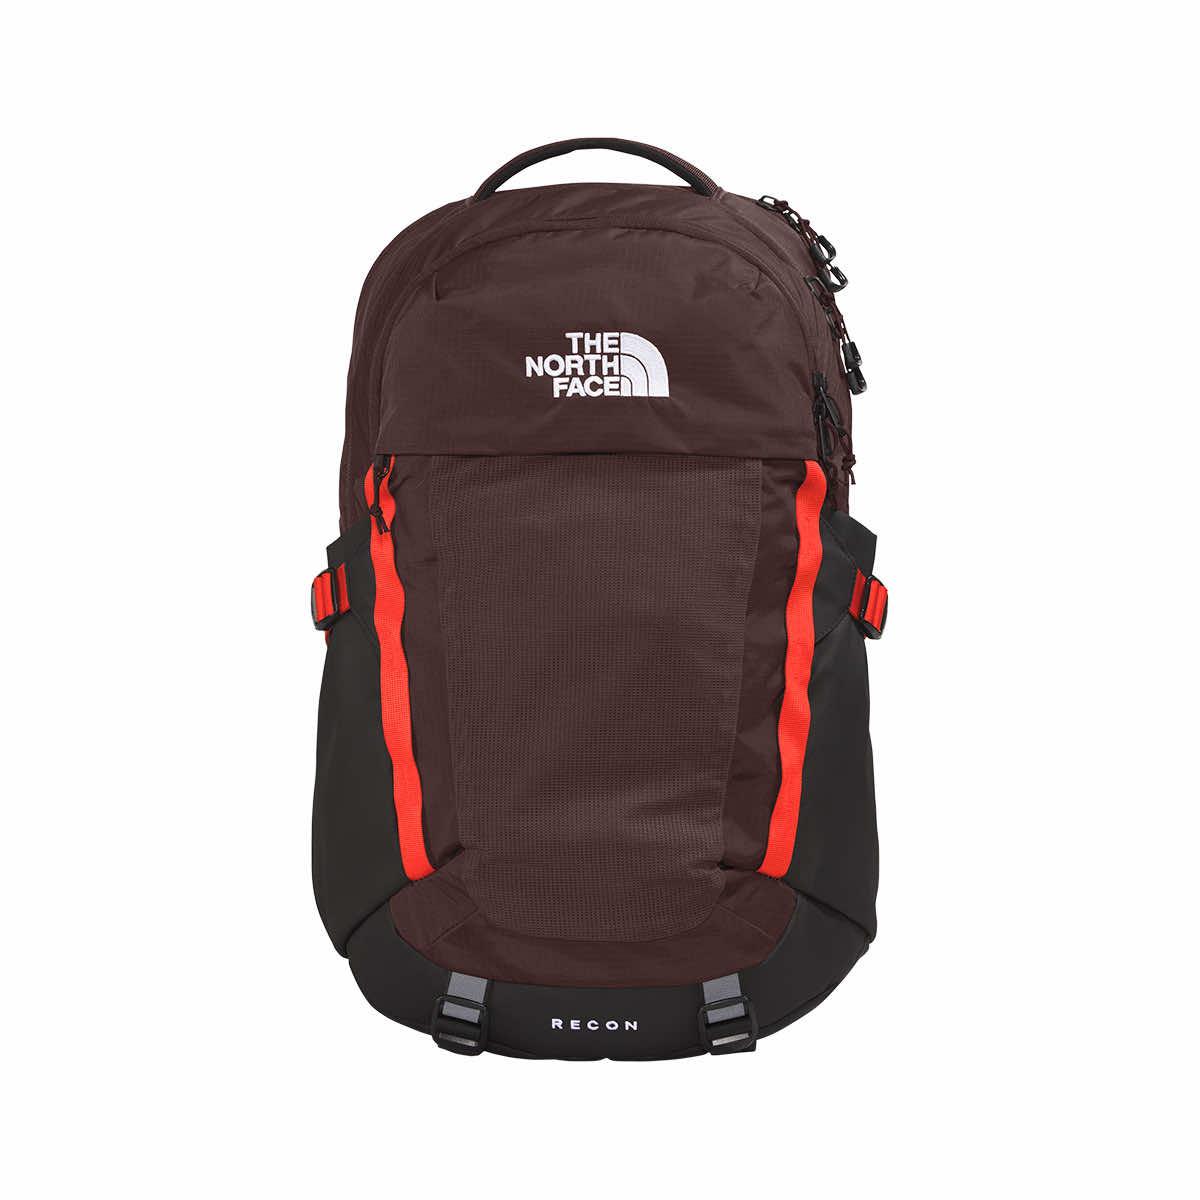 The North Face Recon Backpack, Timber Tan/Demitasse Brown